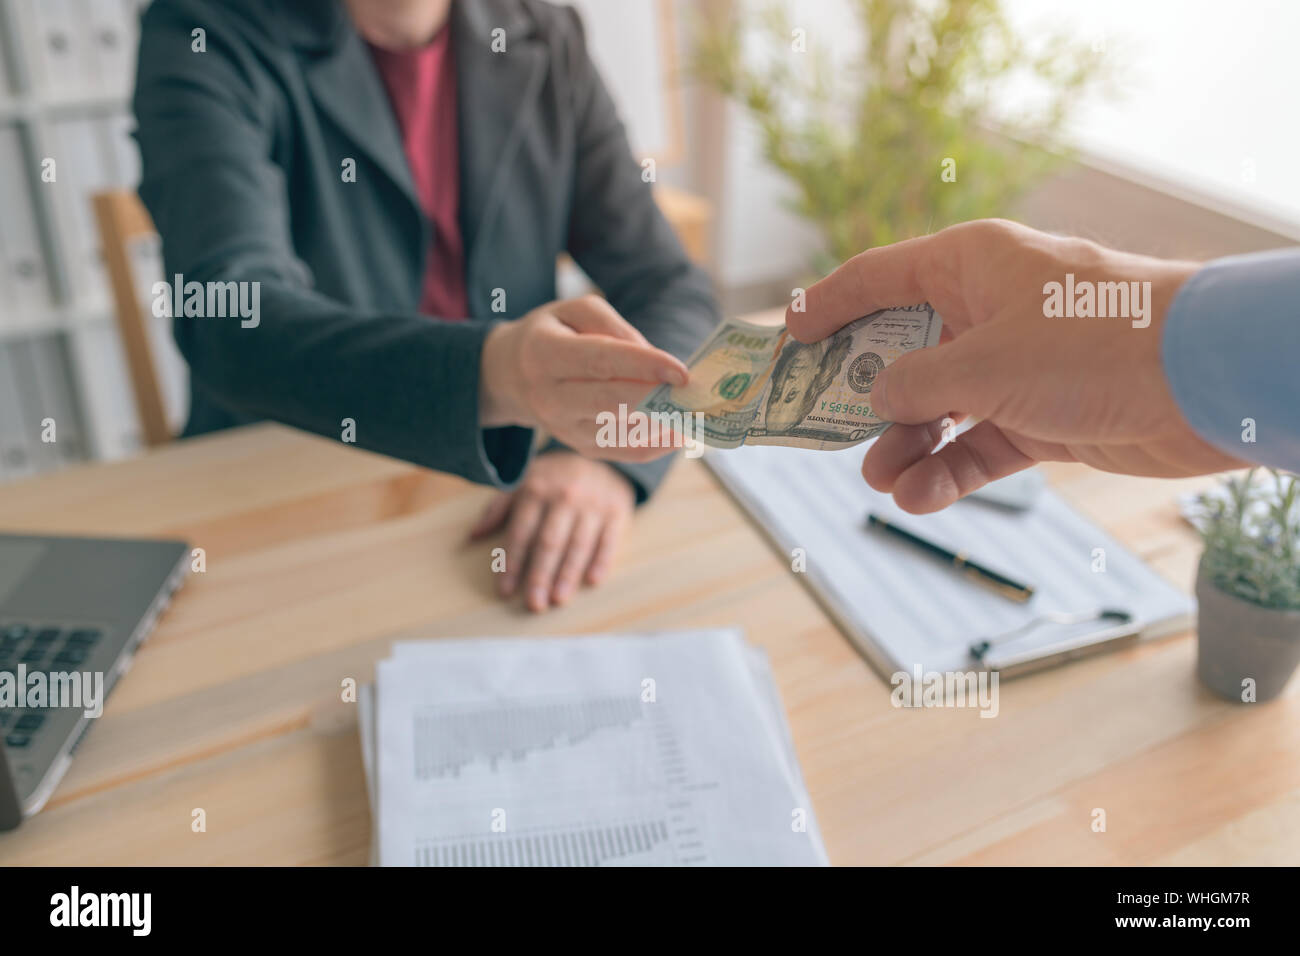 Business corruption, man passing 100 dollar bill to woman in business office, hush money and bribery concept Stock Photo